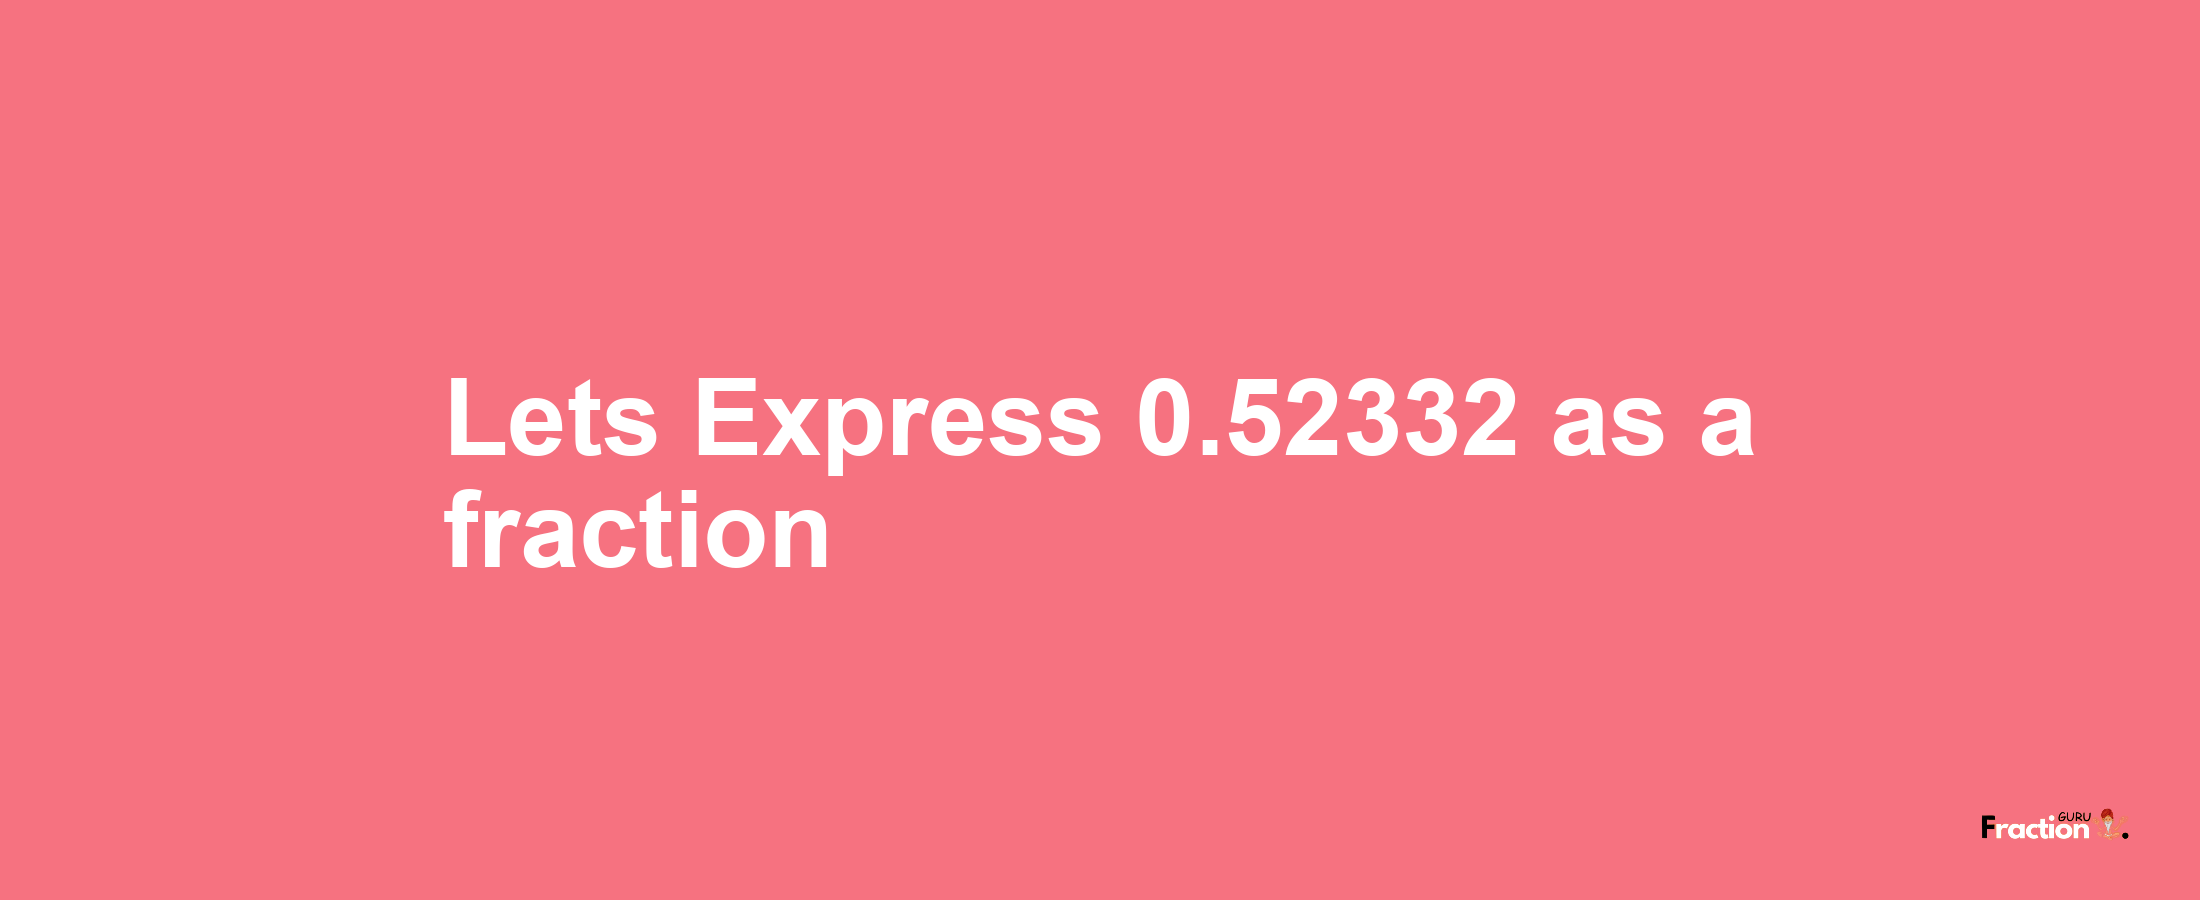 Lets Express 0.52332 as afraction